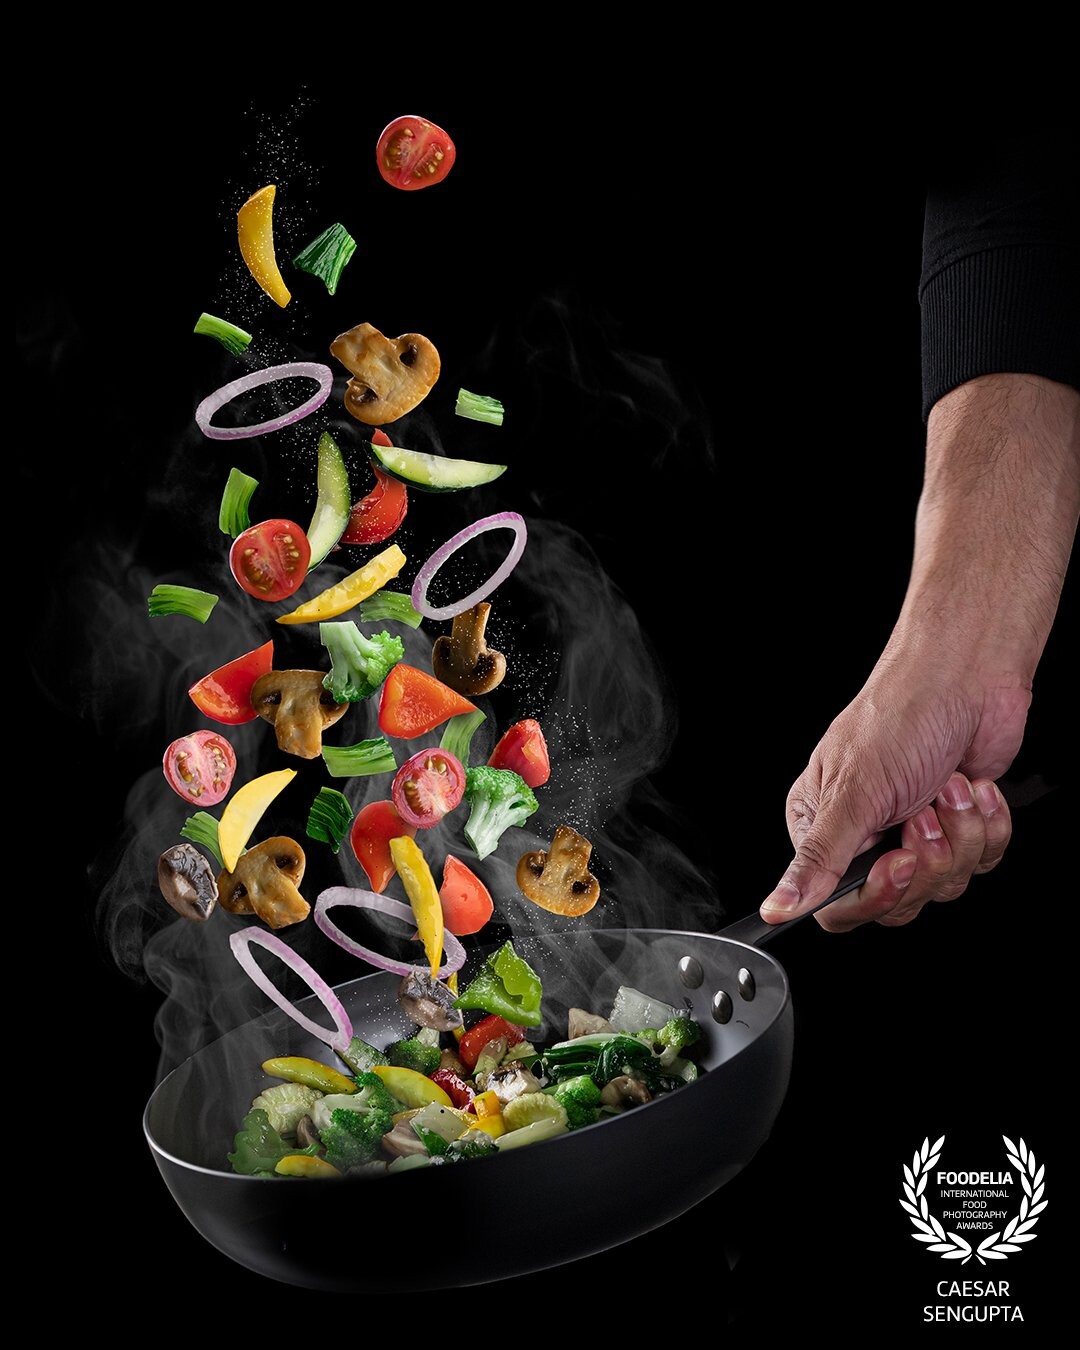 Its a composite food levitation image. The idea was to showcase the colours of the food. The chef's hand adds the human element which is a key component as well in the frame.